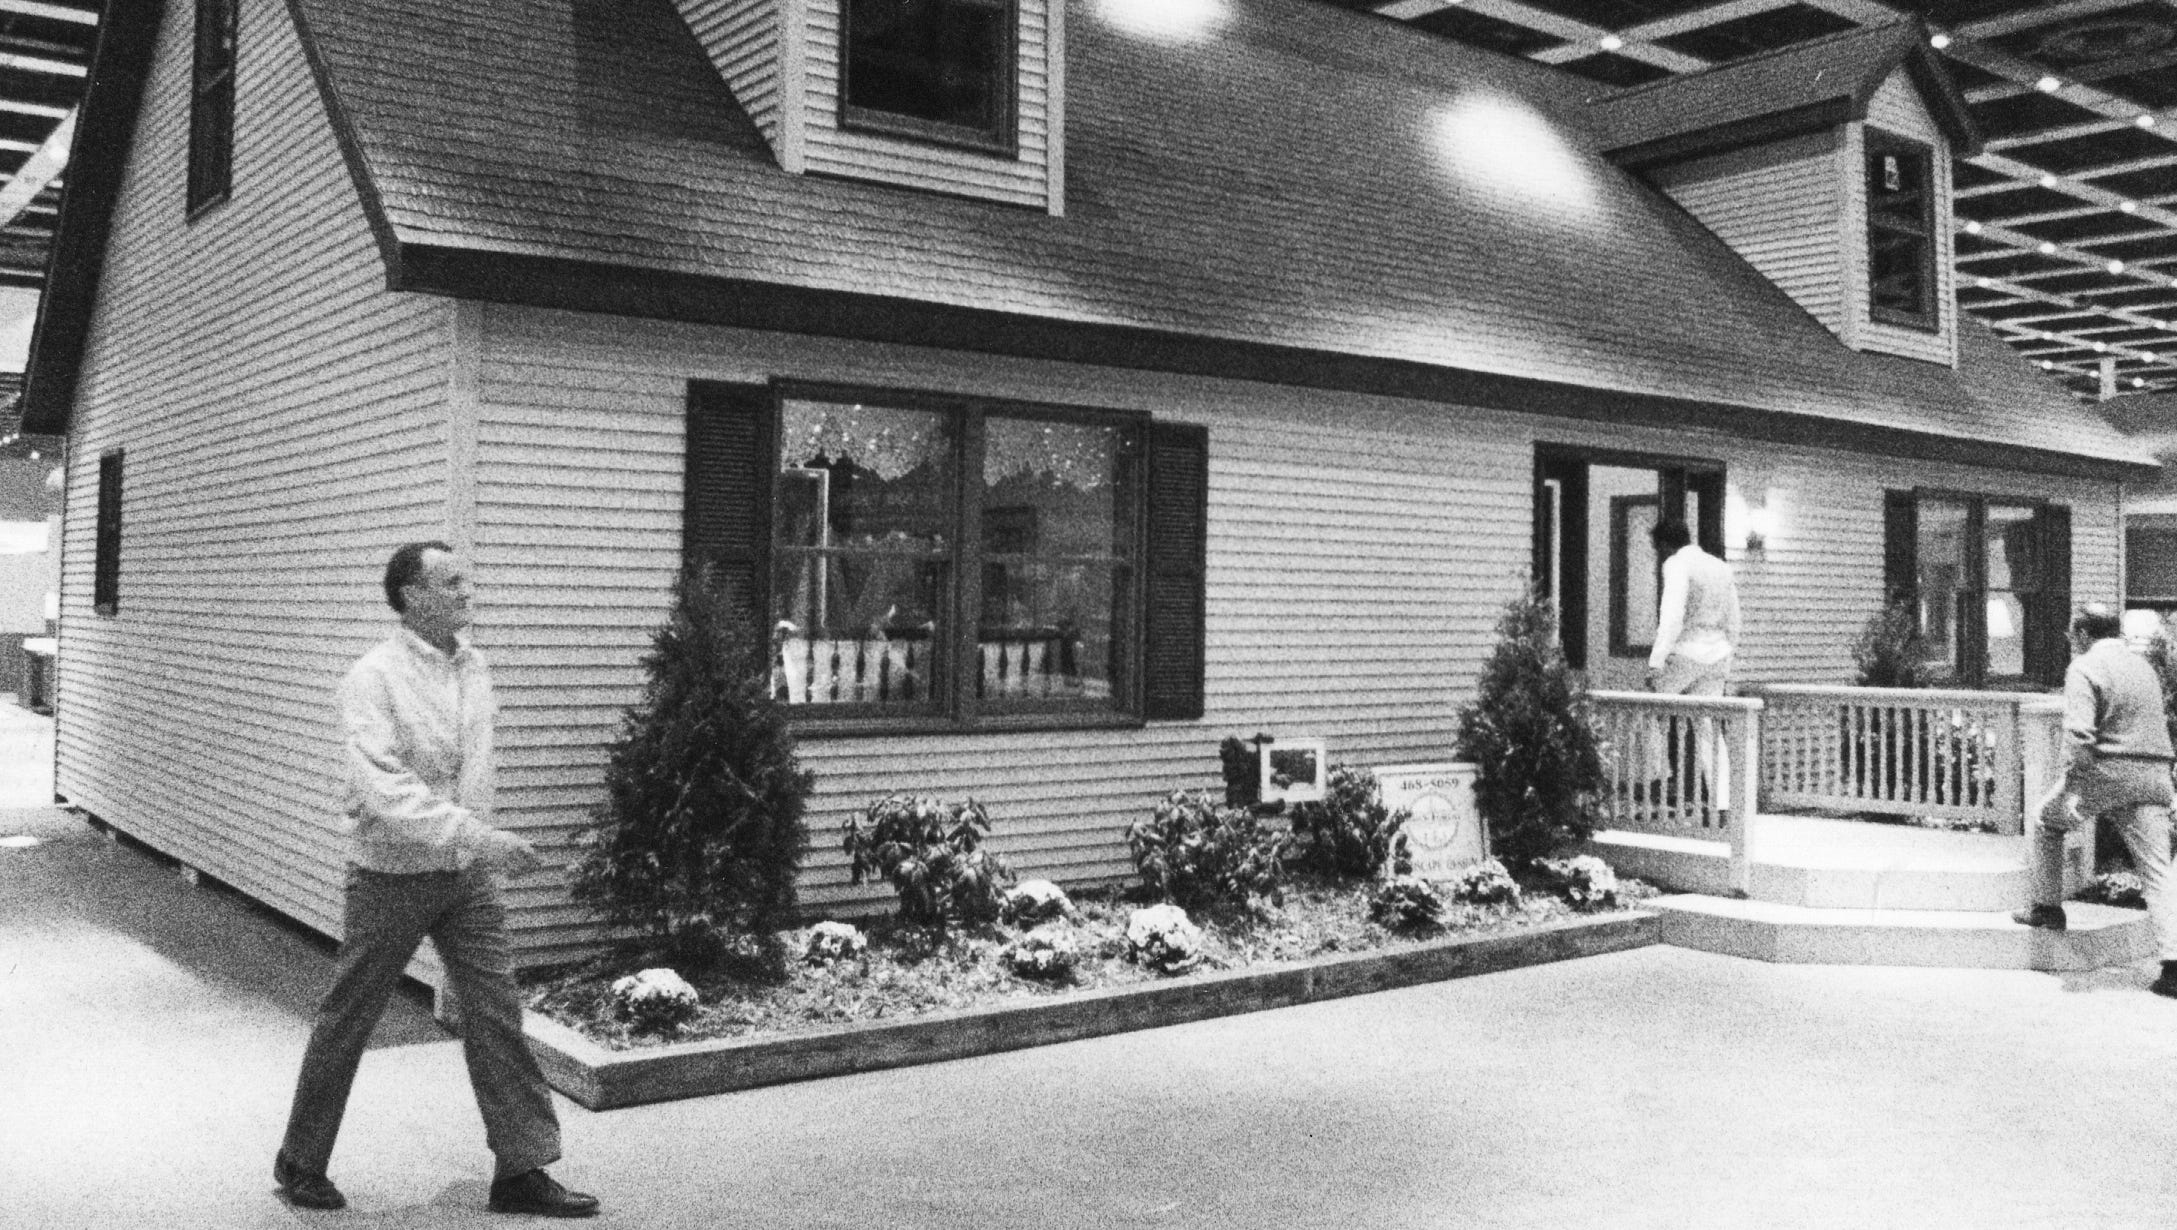 Cobo hosted the Detroit Home Flower, Furniture and Garden Show on March 20, 1989.